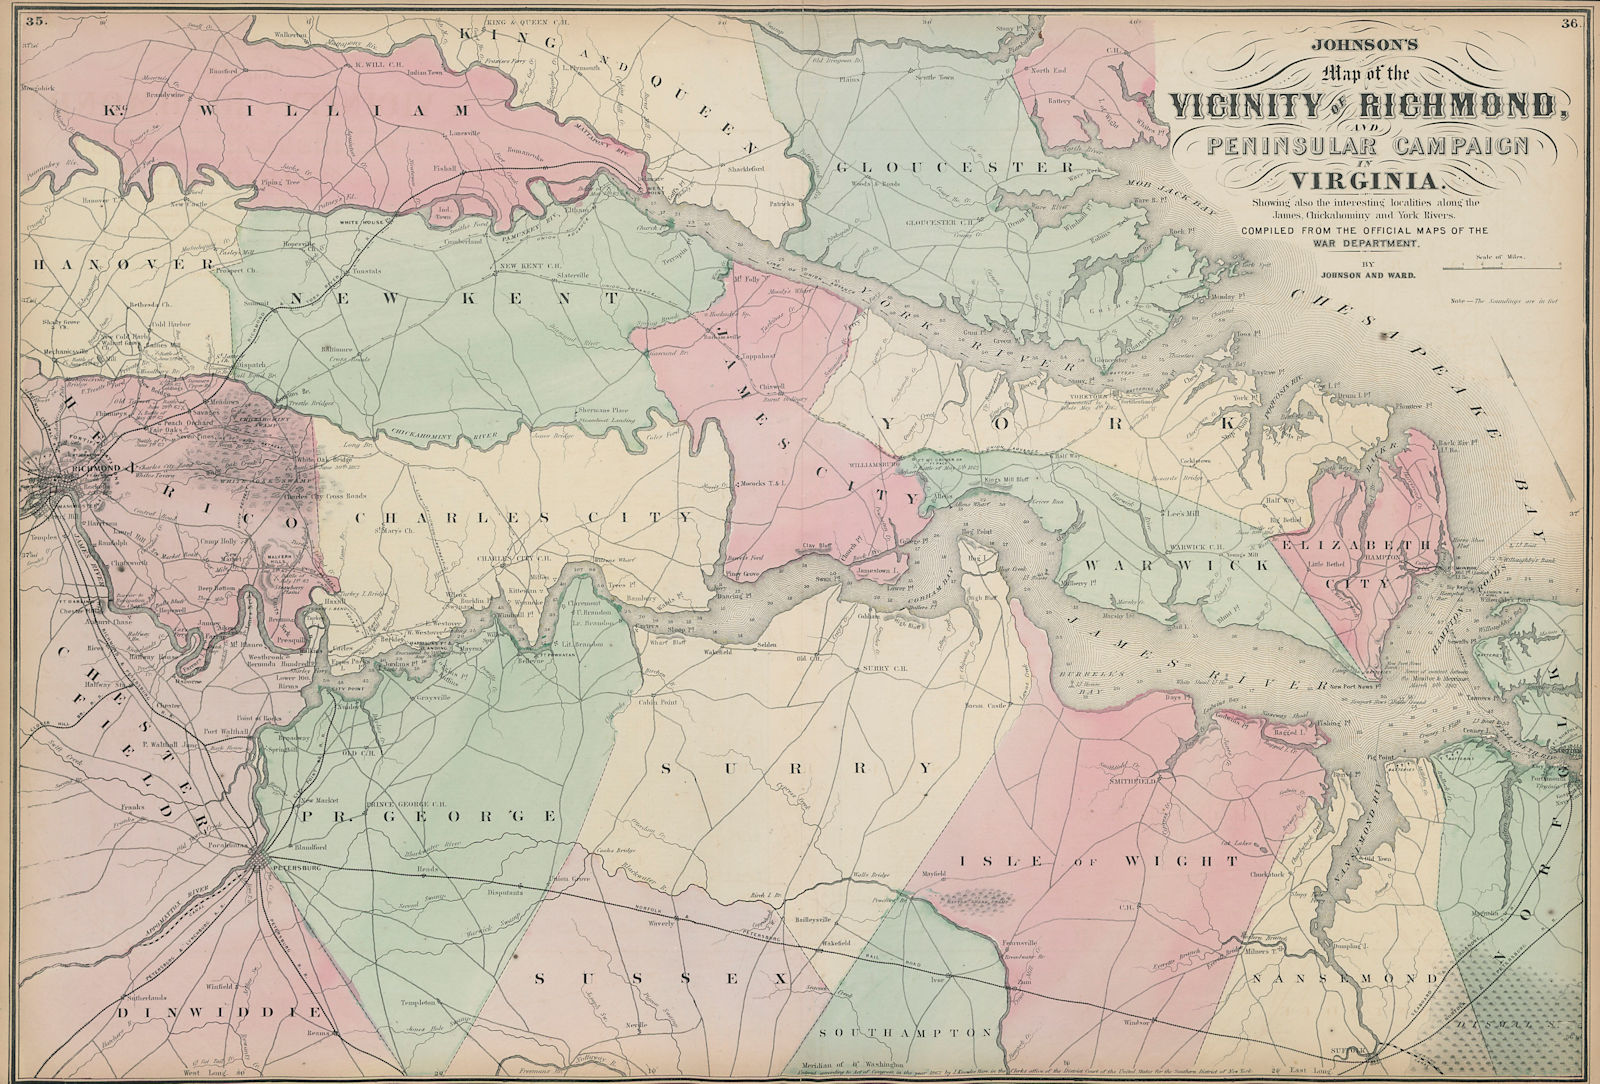 Associate Product Vicinity of Richmond & Peninsular Campaign in Virginia. JOHNSON 1865 old map